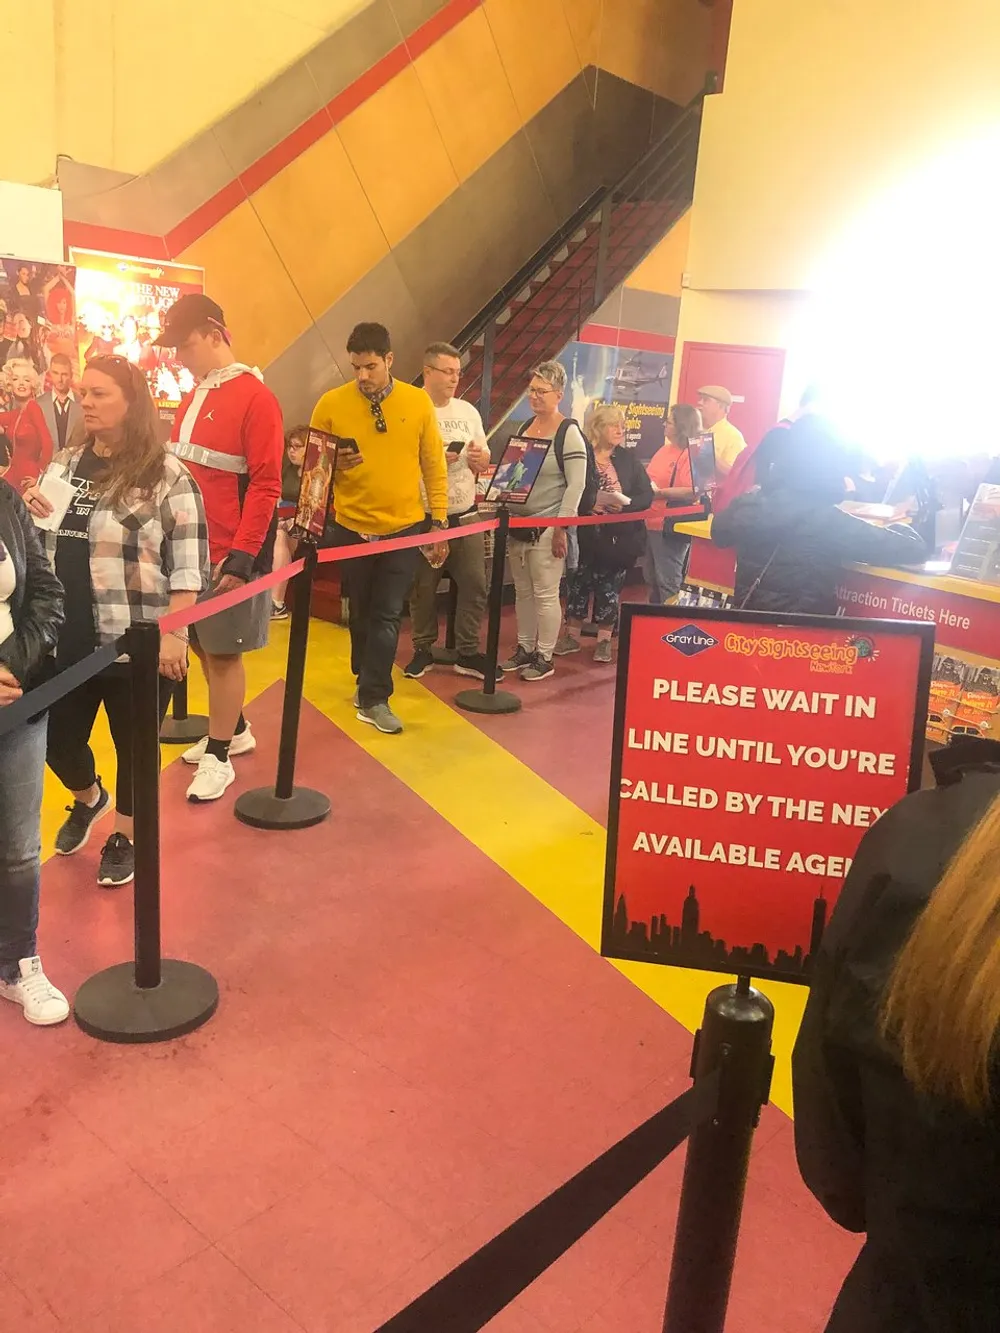 Guests are queuing indoors in front of a ticket counter with a sign indicating to wait until being called by the next available agent